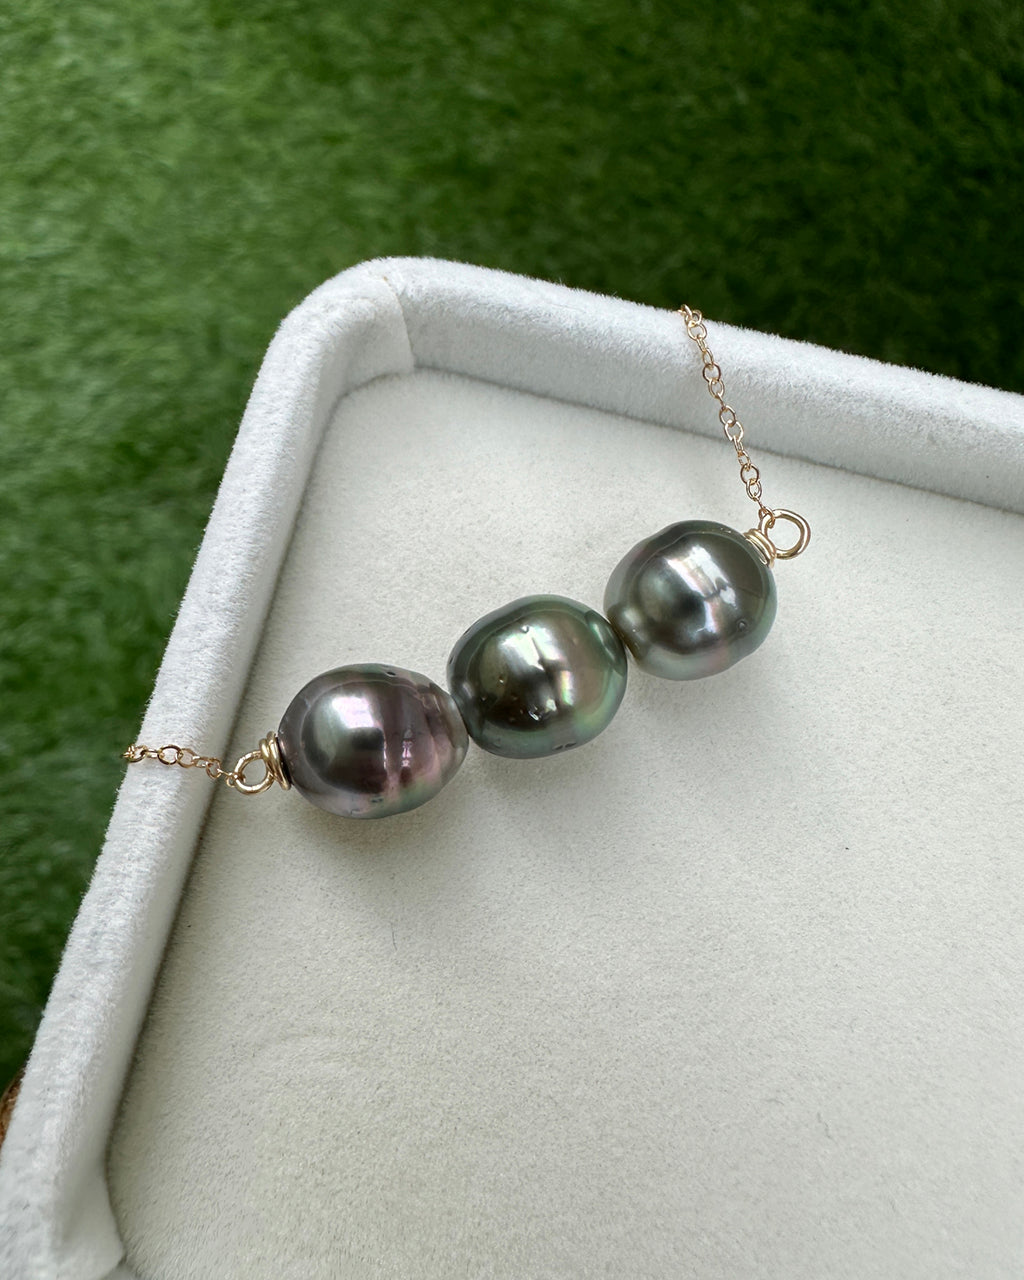 Tahitian Pearl Trio Necklace - 14k gold filled Tahitian Pearl Jewelry